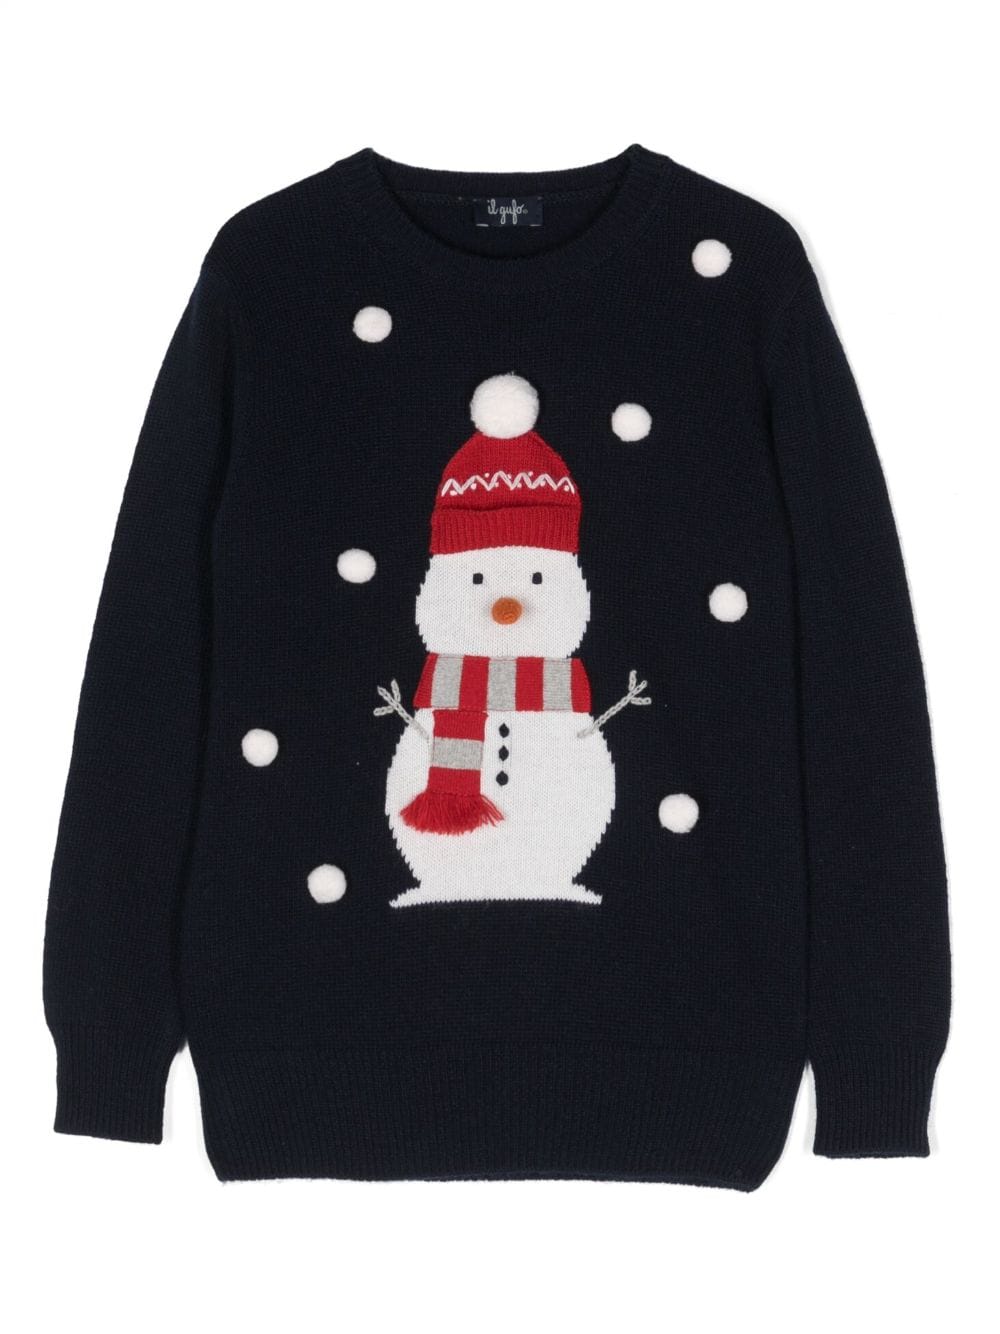 Blue sweater for children with snowman